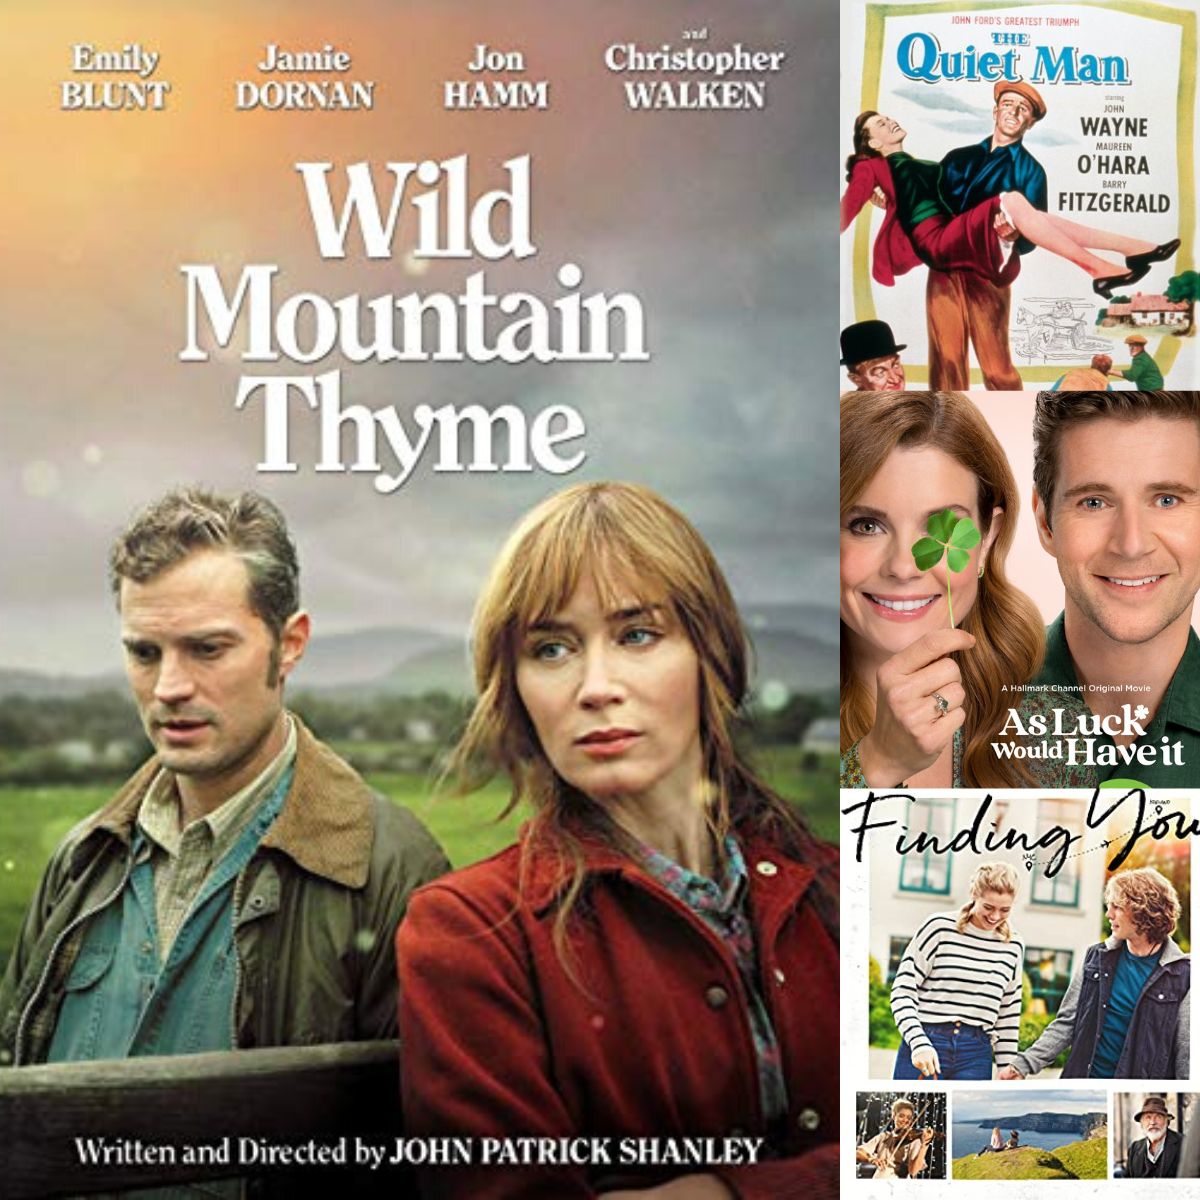 A photo collage shows several movie posters for romantic movies set in Ireland.